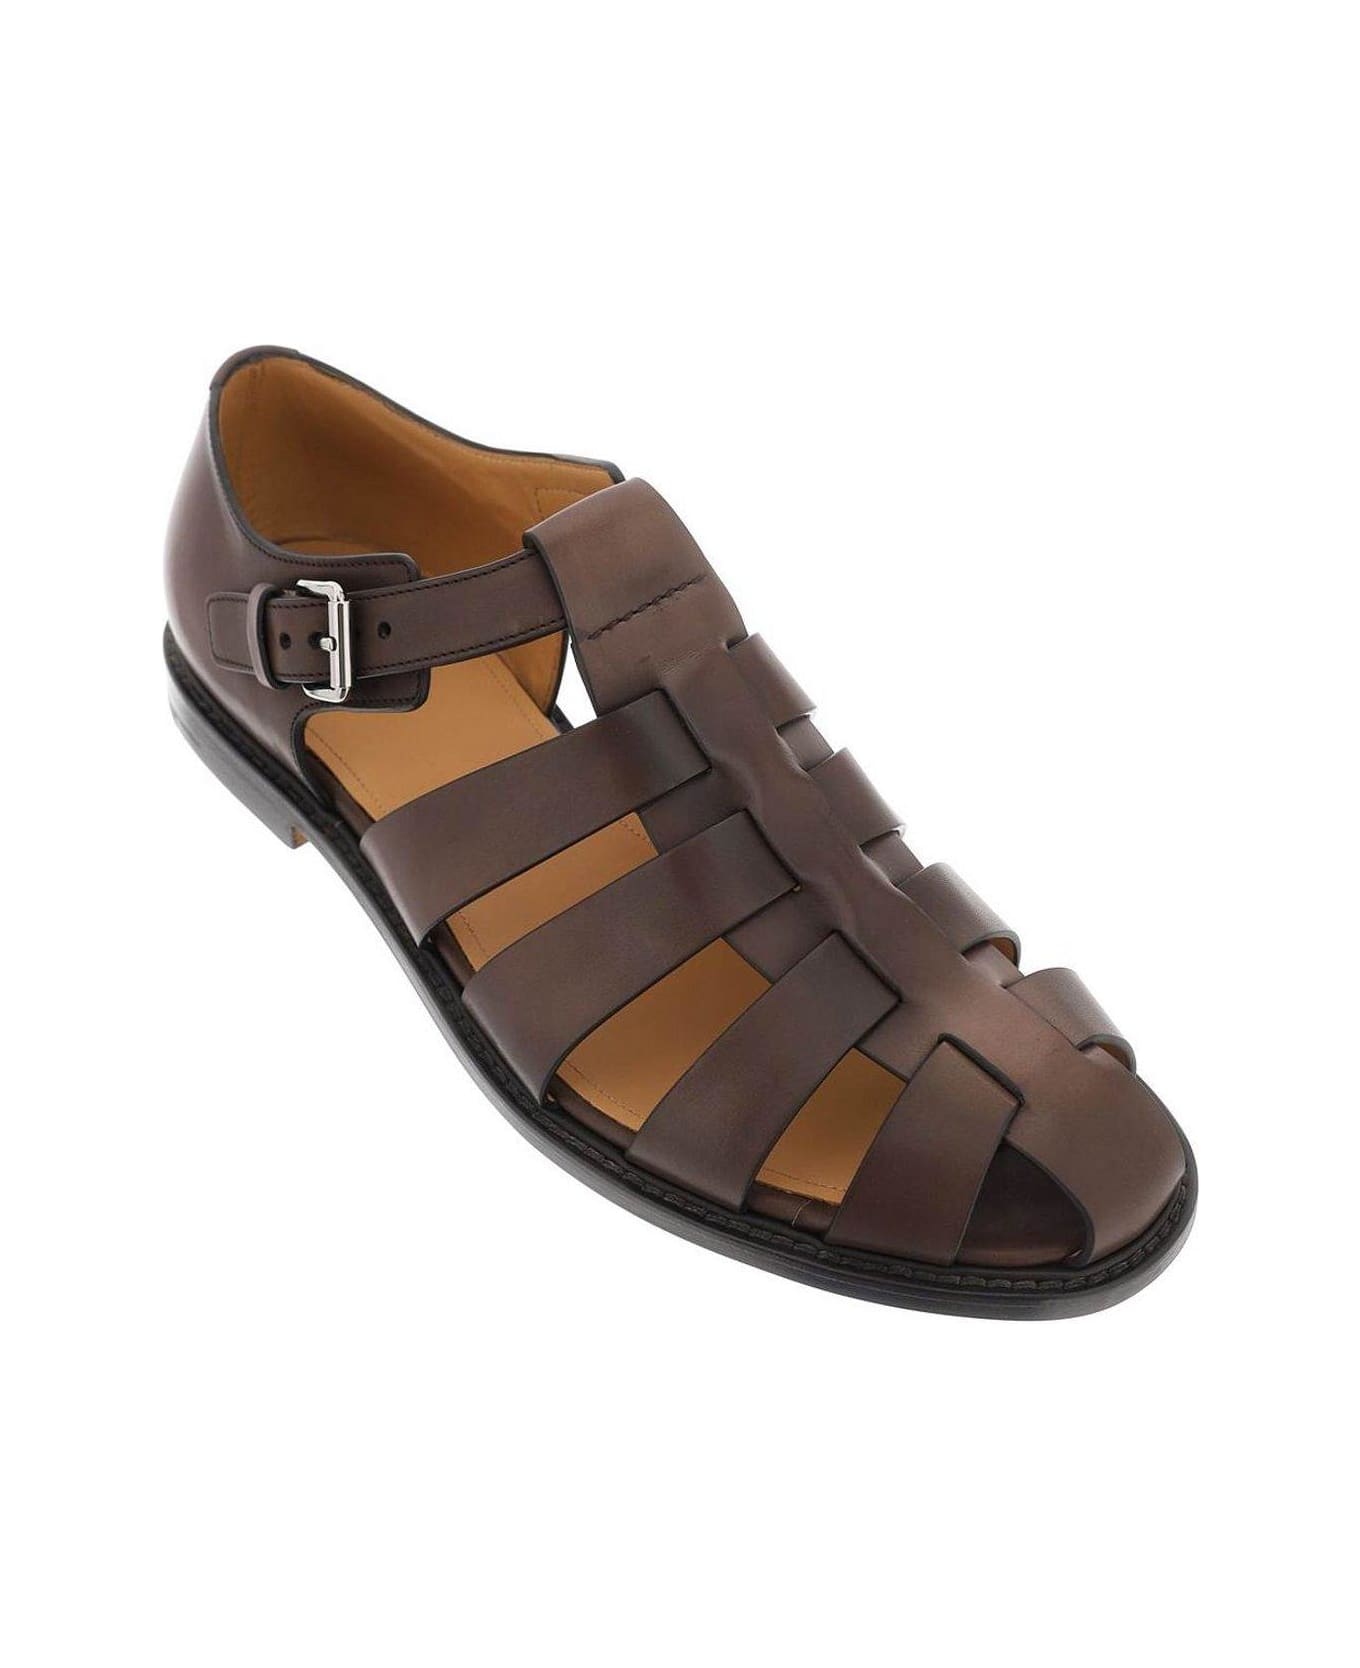 Church's Fisherman Sandals - Brown その他各種シューズ